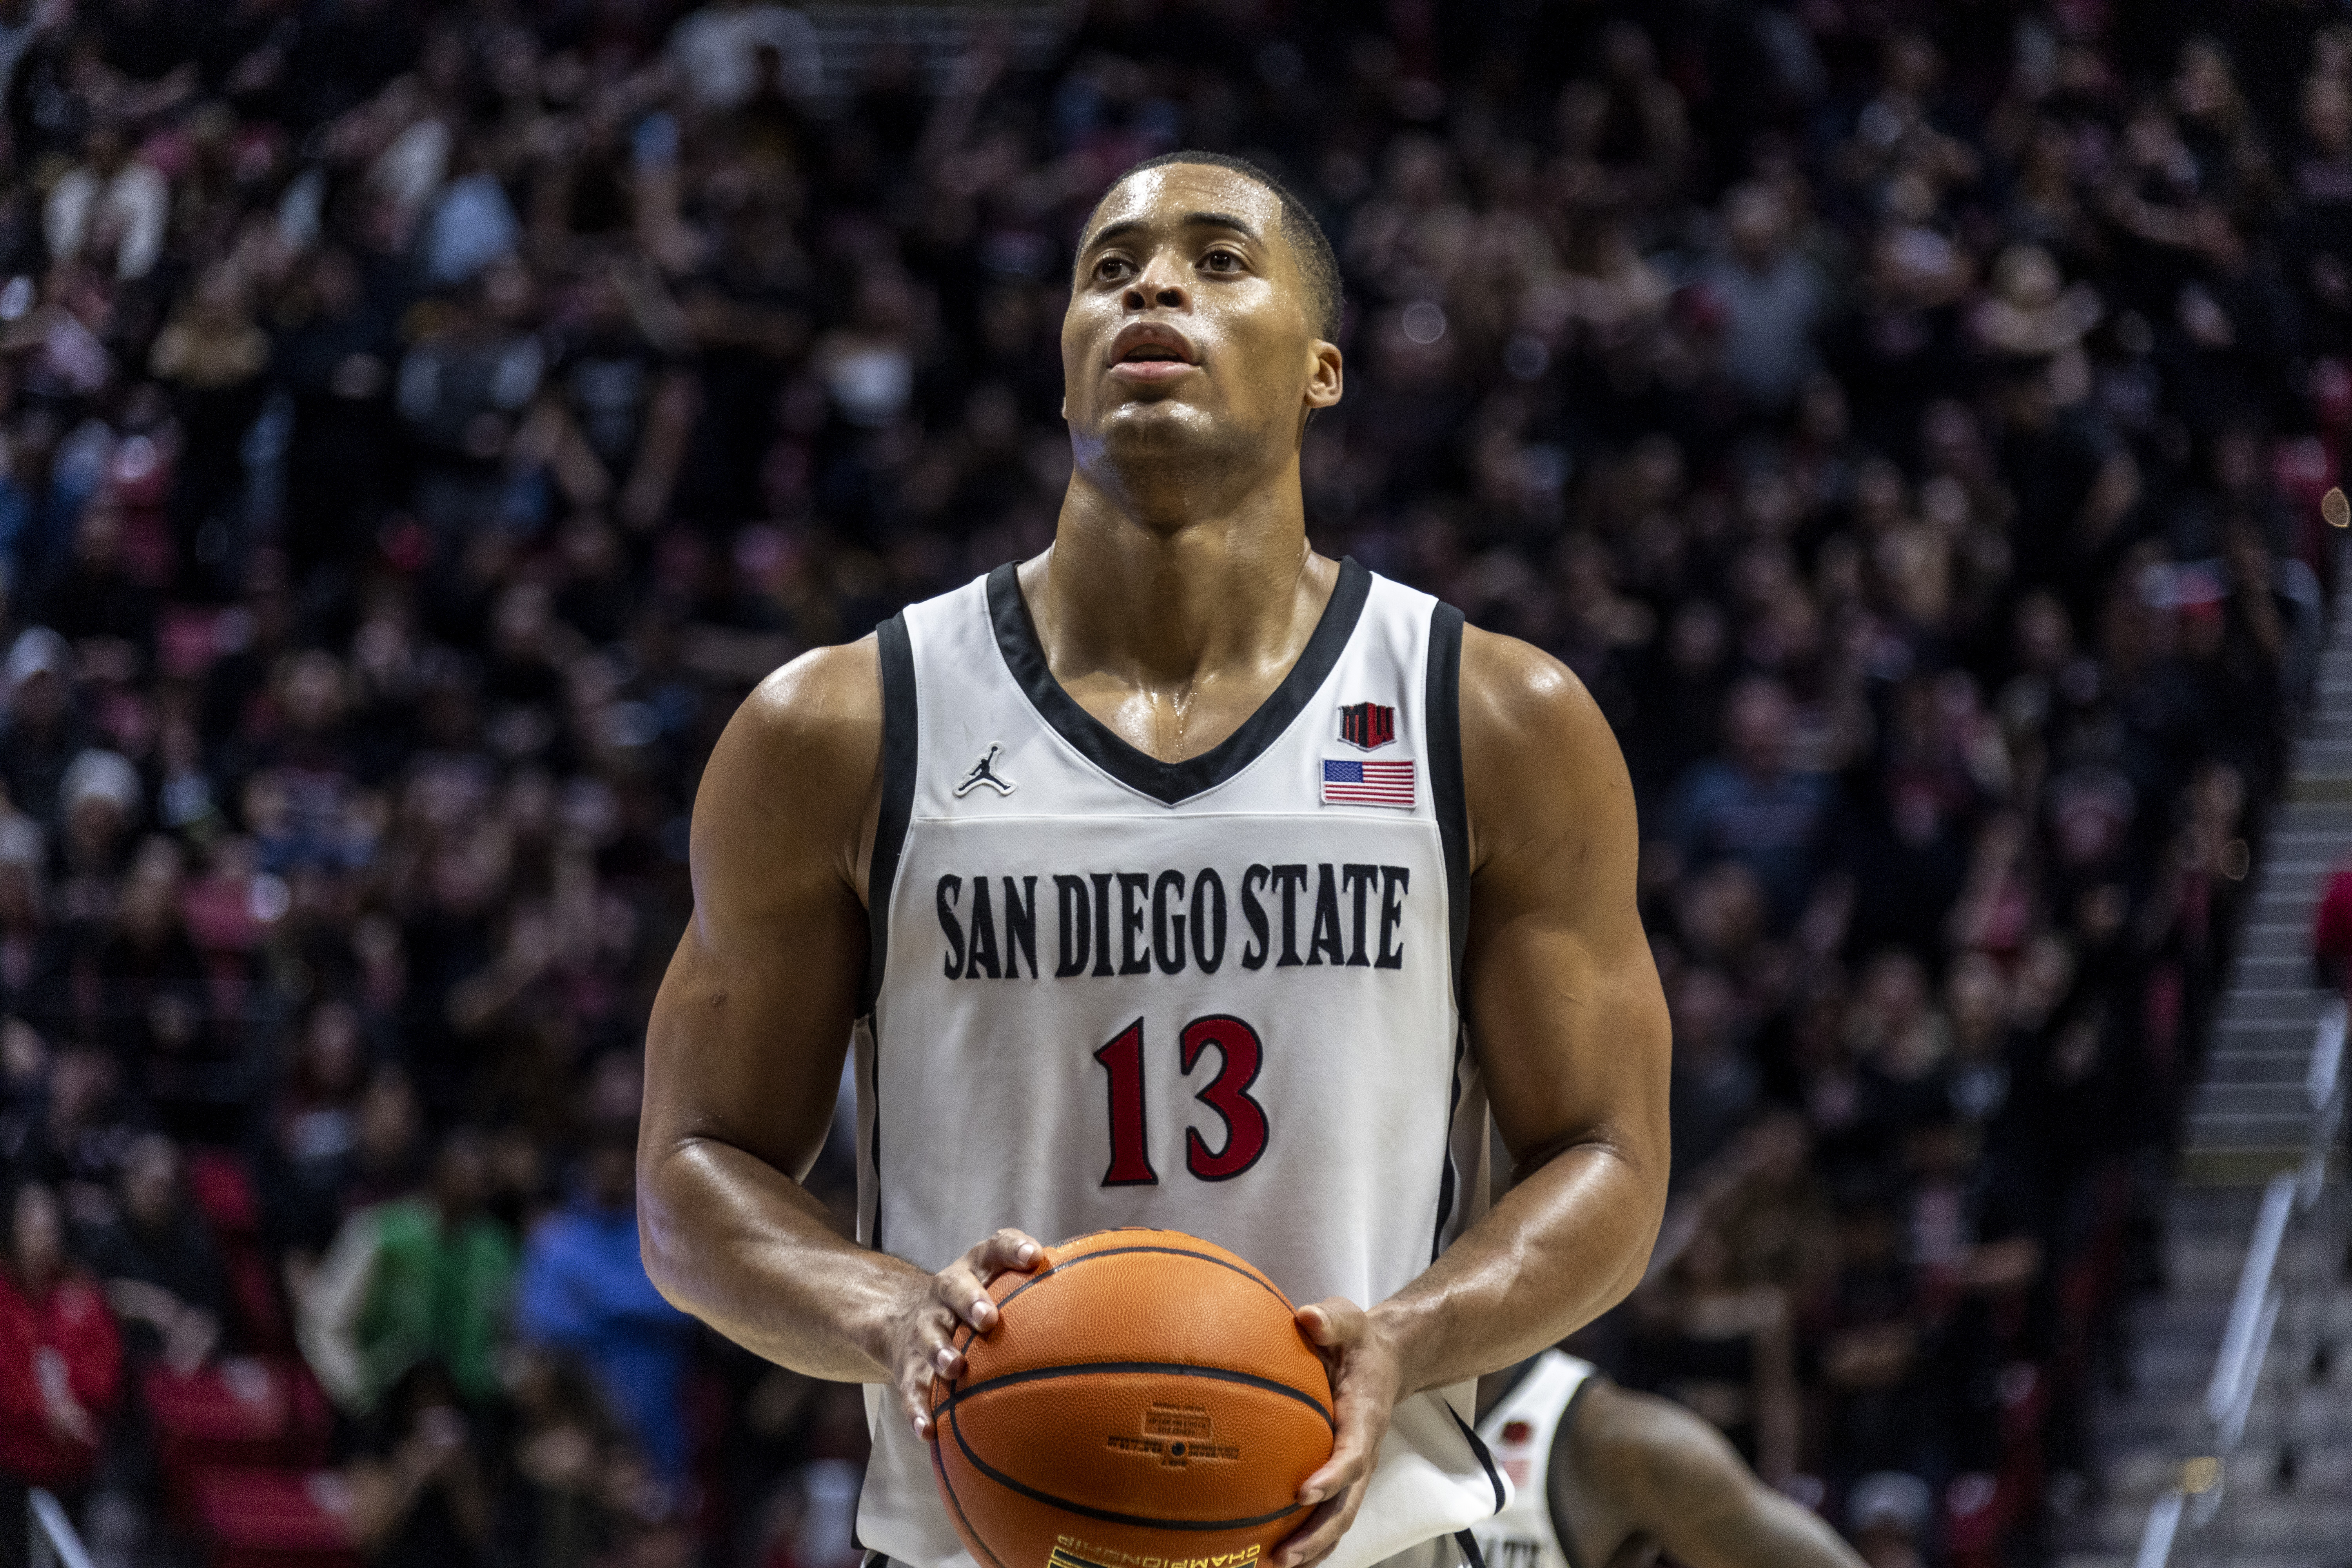 COLLEGE BASKETBALL: FEB 16 New Mexico at San Diego State